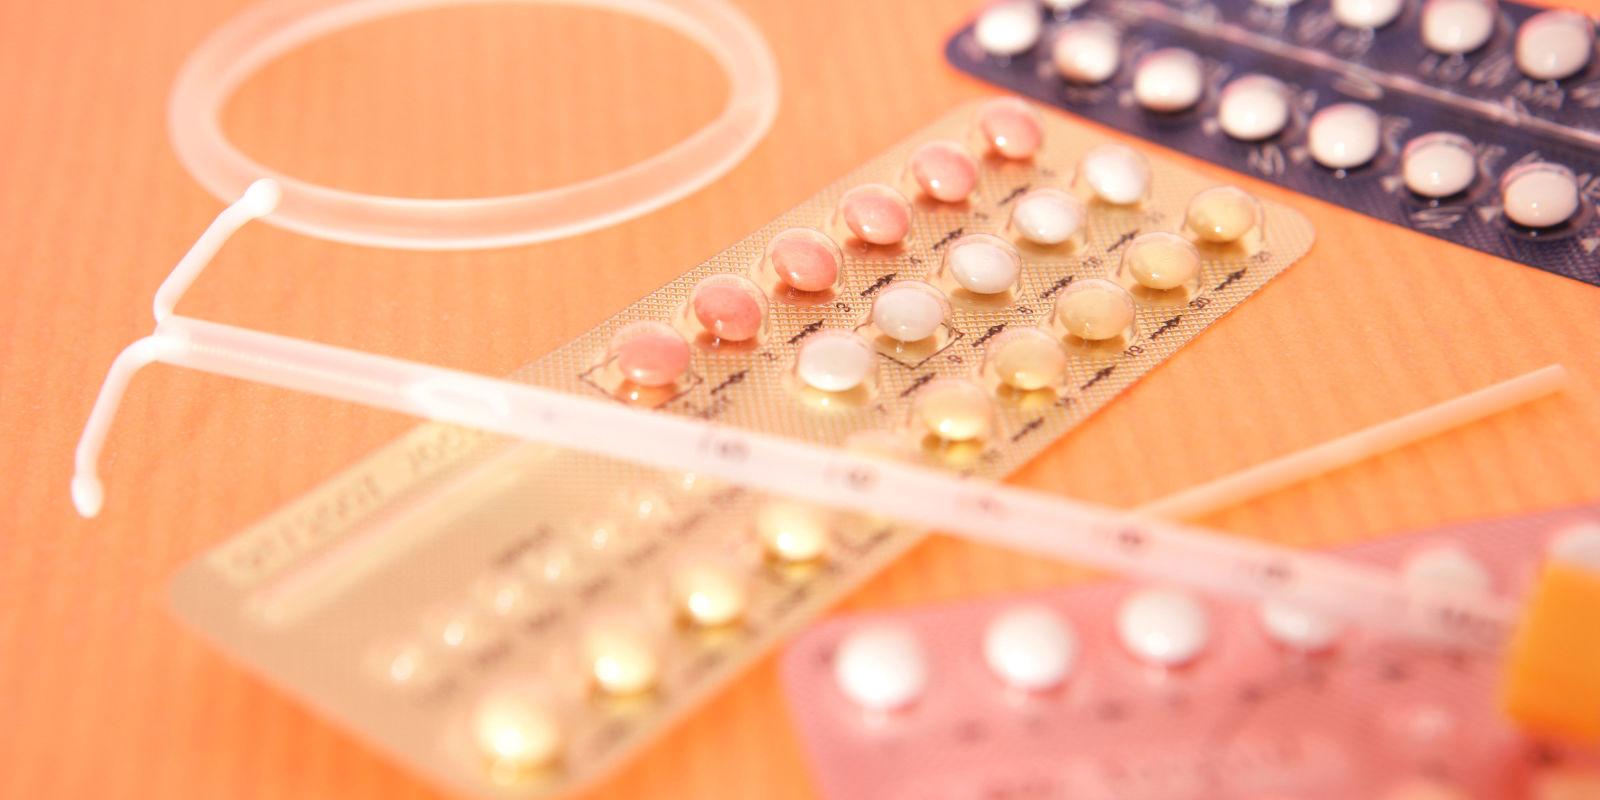 Under What Conditions Is It Acceptable to Use Contraception?